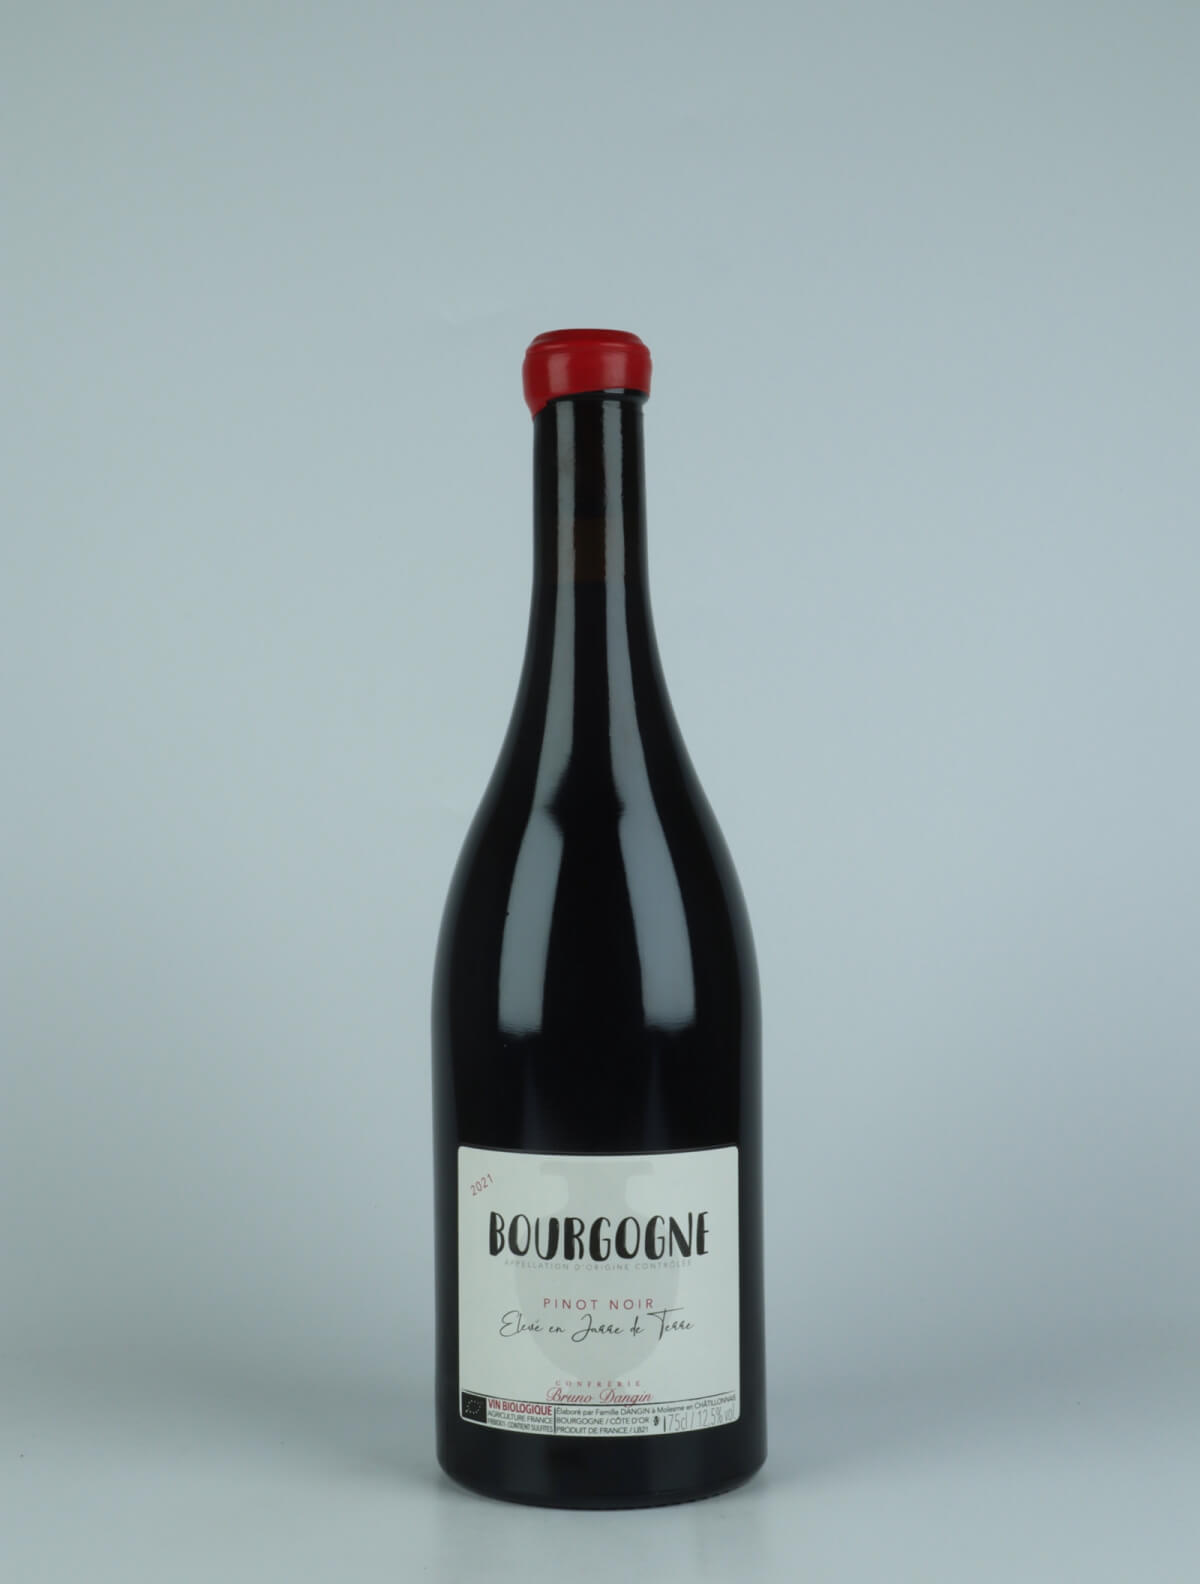 A bottle 2021 Bourgogne Rouge Red wine from Domaine Bruno Dangin, Burgundy in France